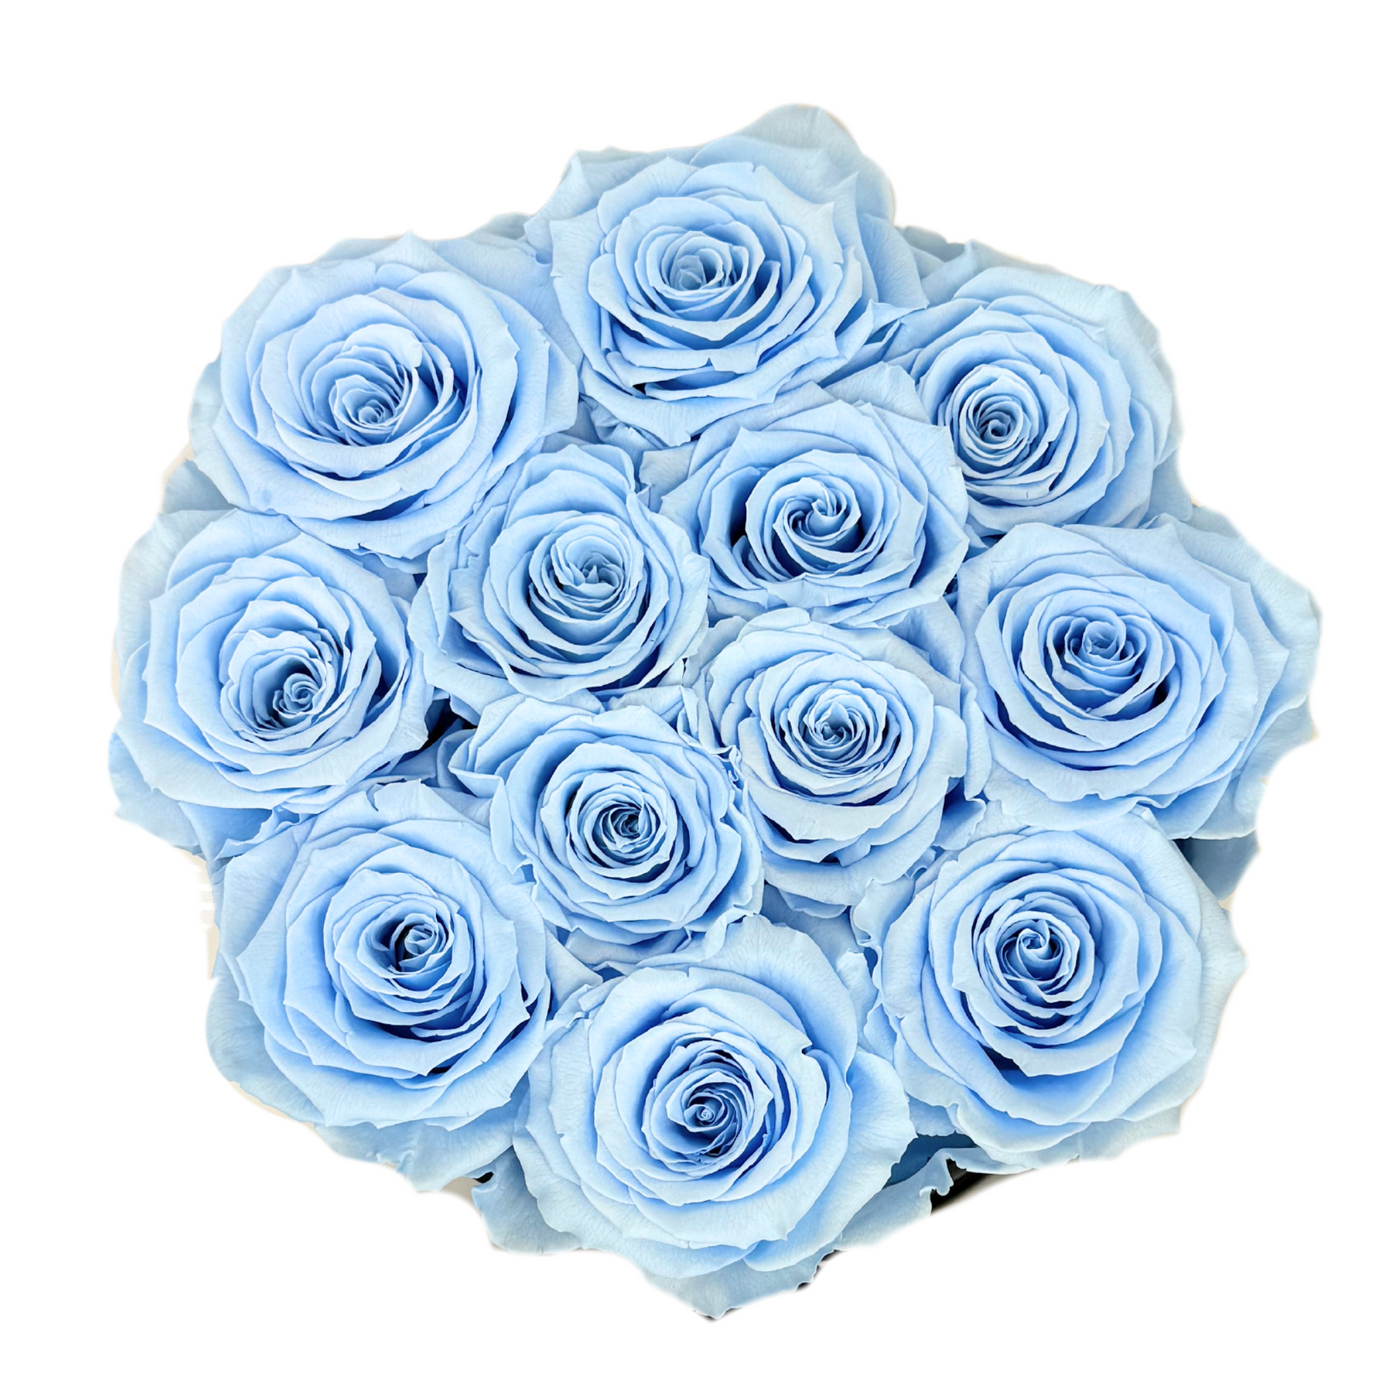 Signature Light Blue Preserved Roses Gift Box